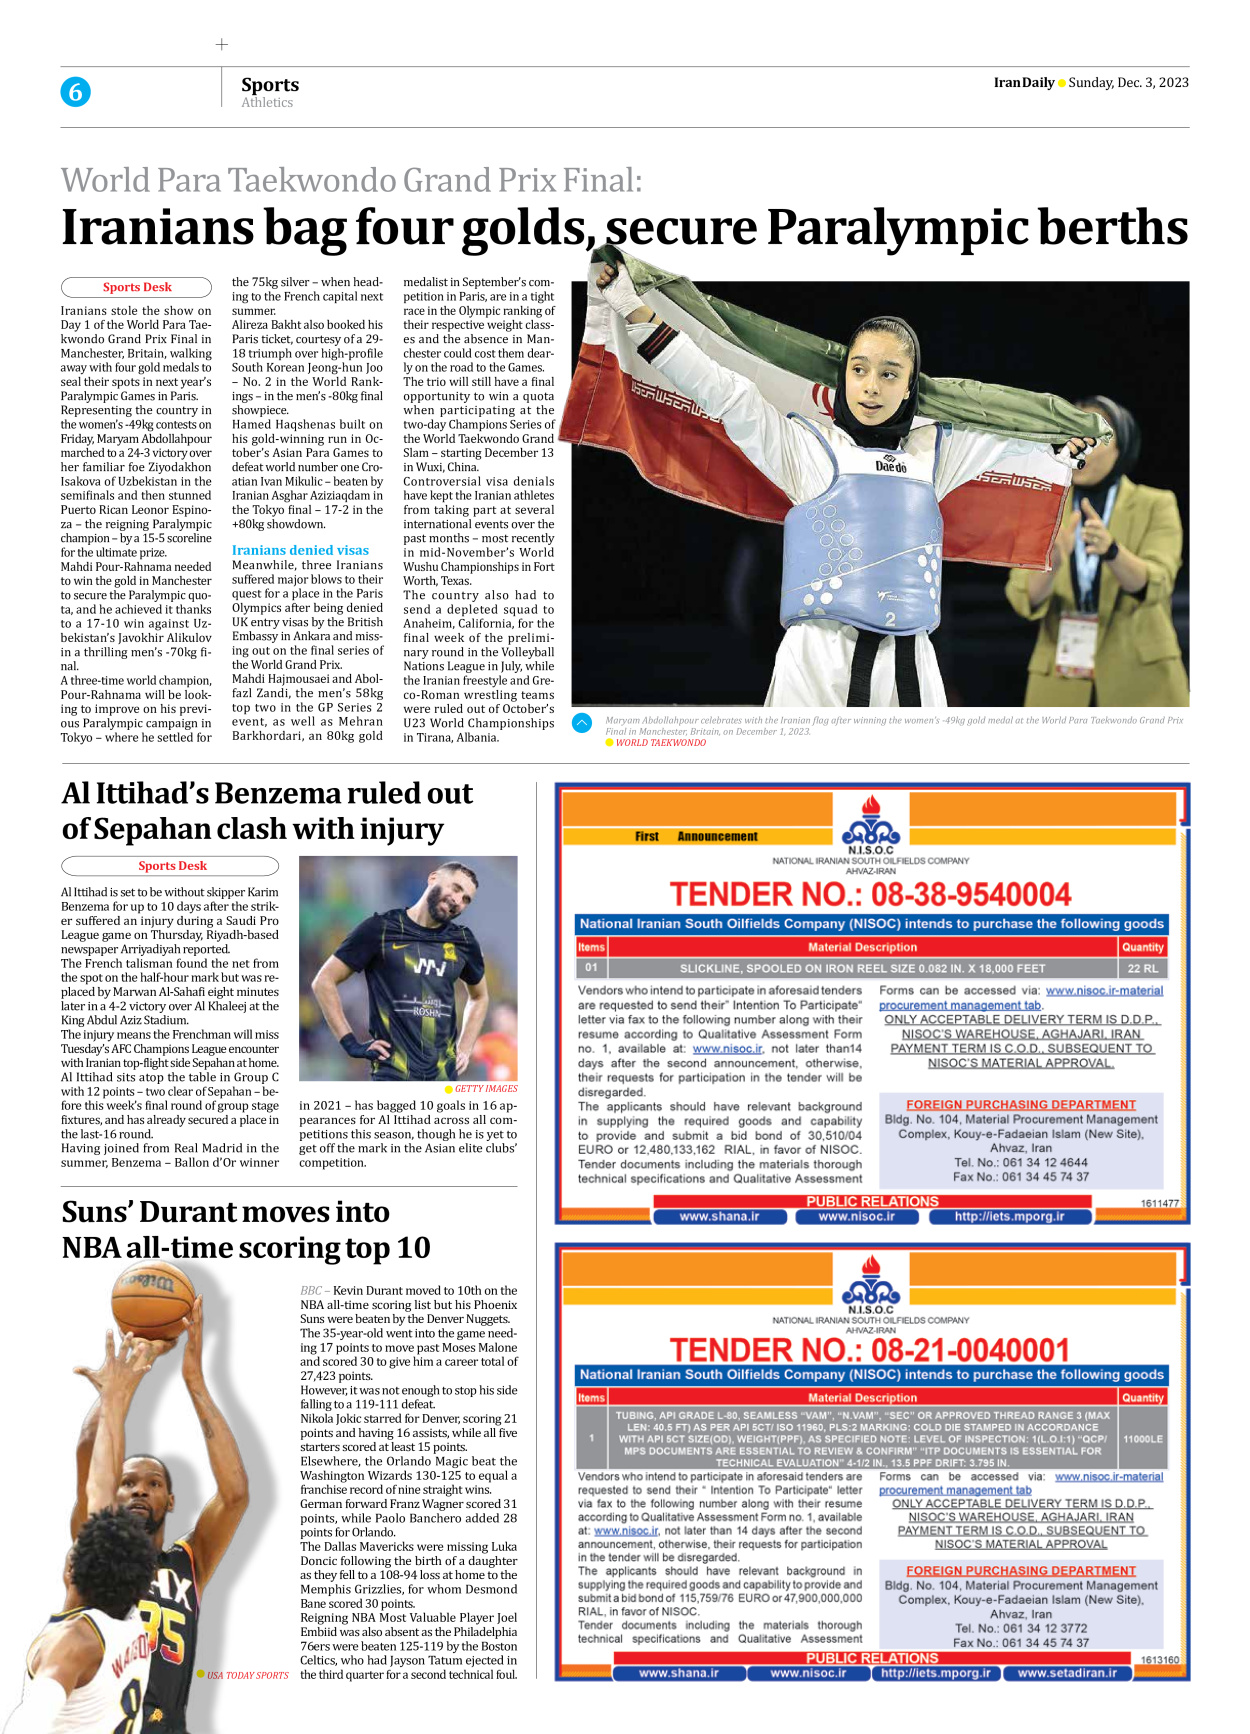 Iran Daily - Number Seven Thousand Four Hundred and Fifty - 03 December 2023 - Page 6